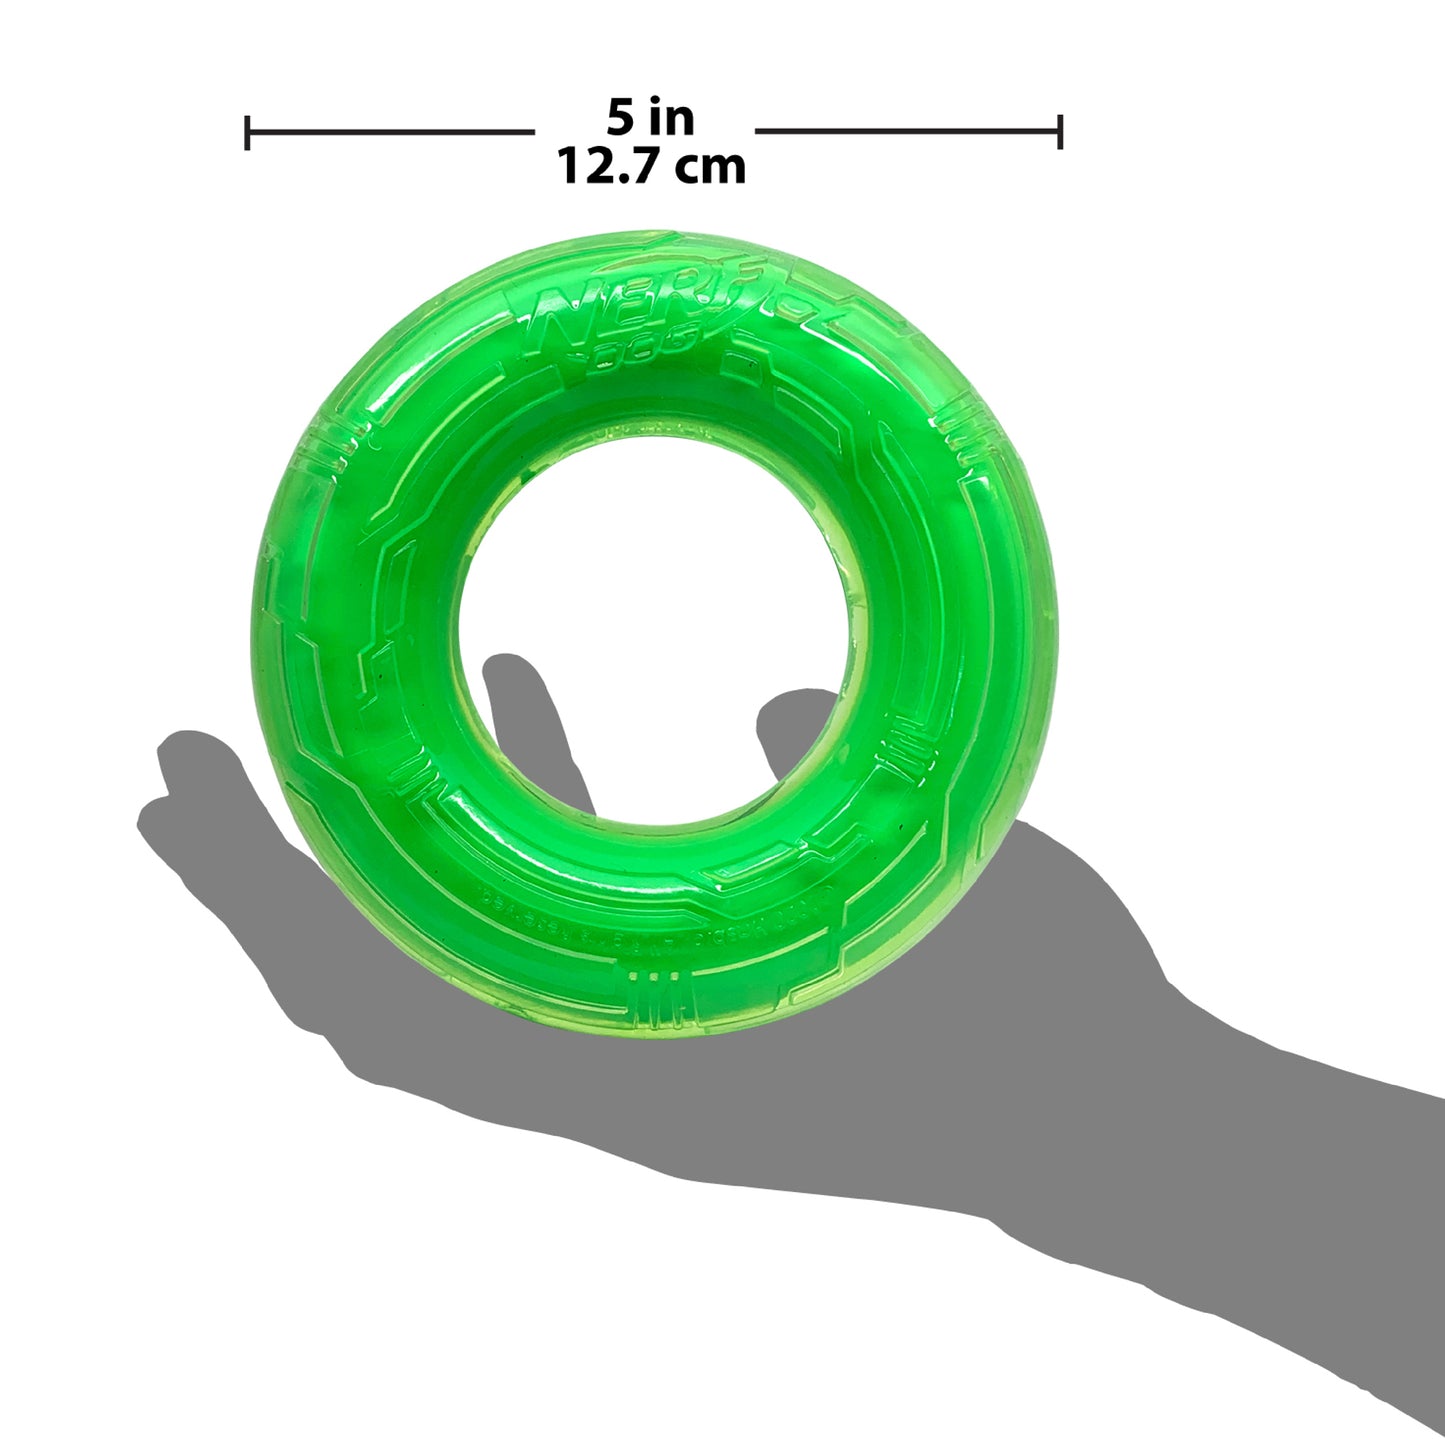 Nerf Scentology Dog Toy Beef Scented Small Green Ring  Dog Toys  | PetMax Canada